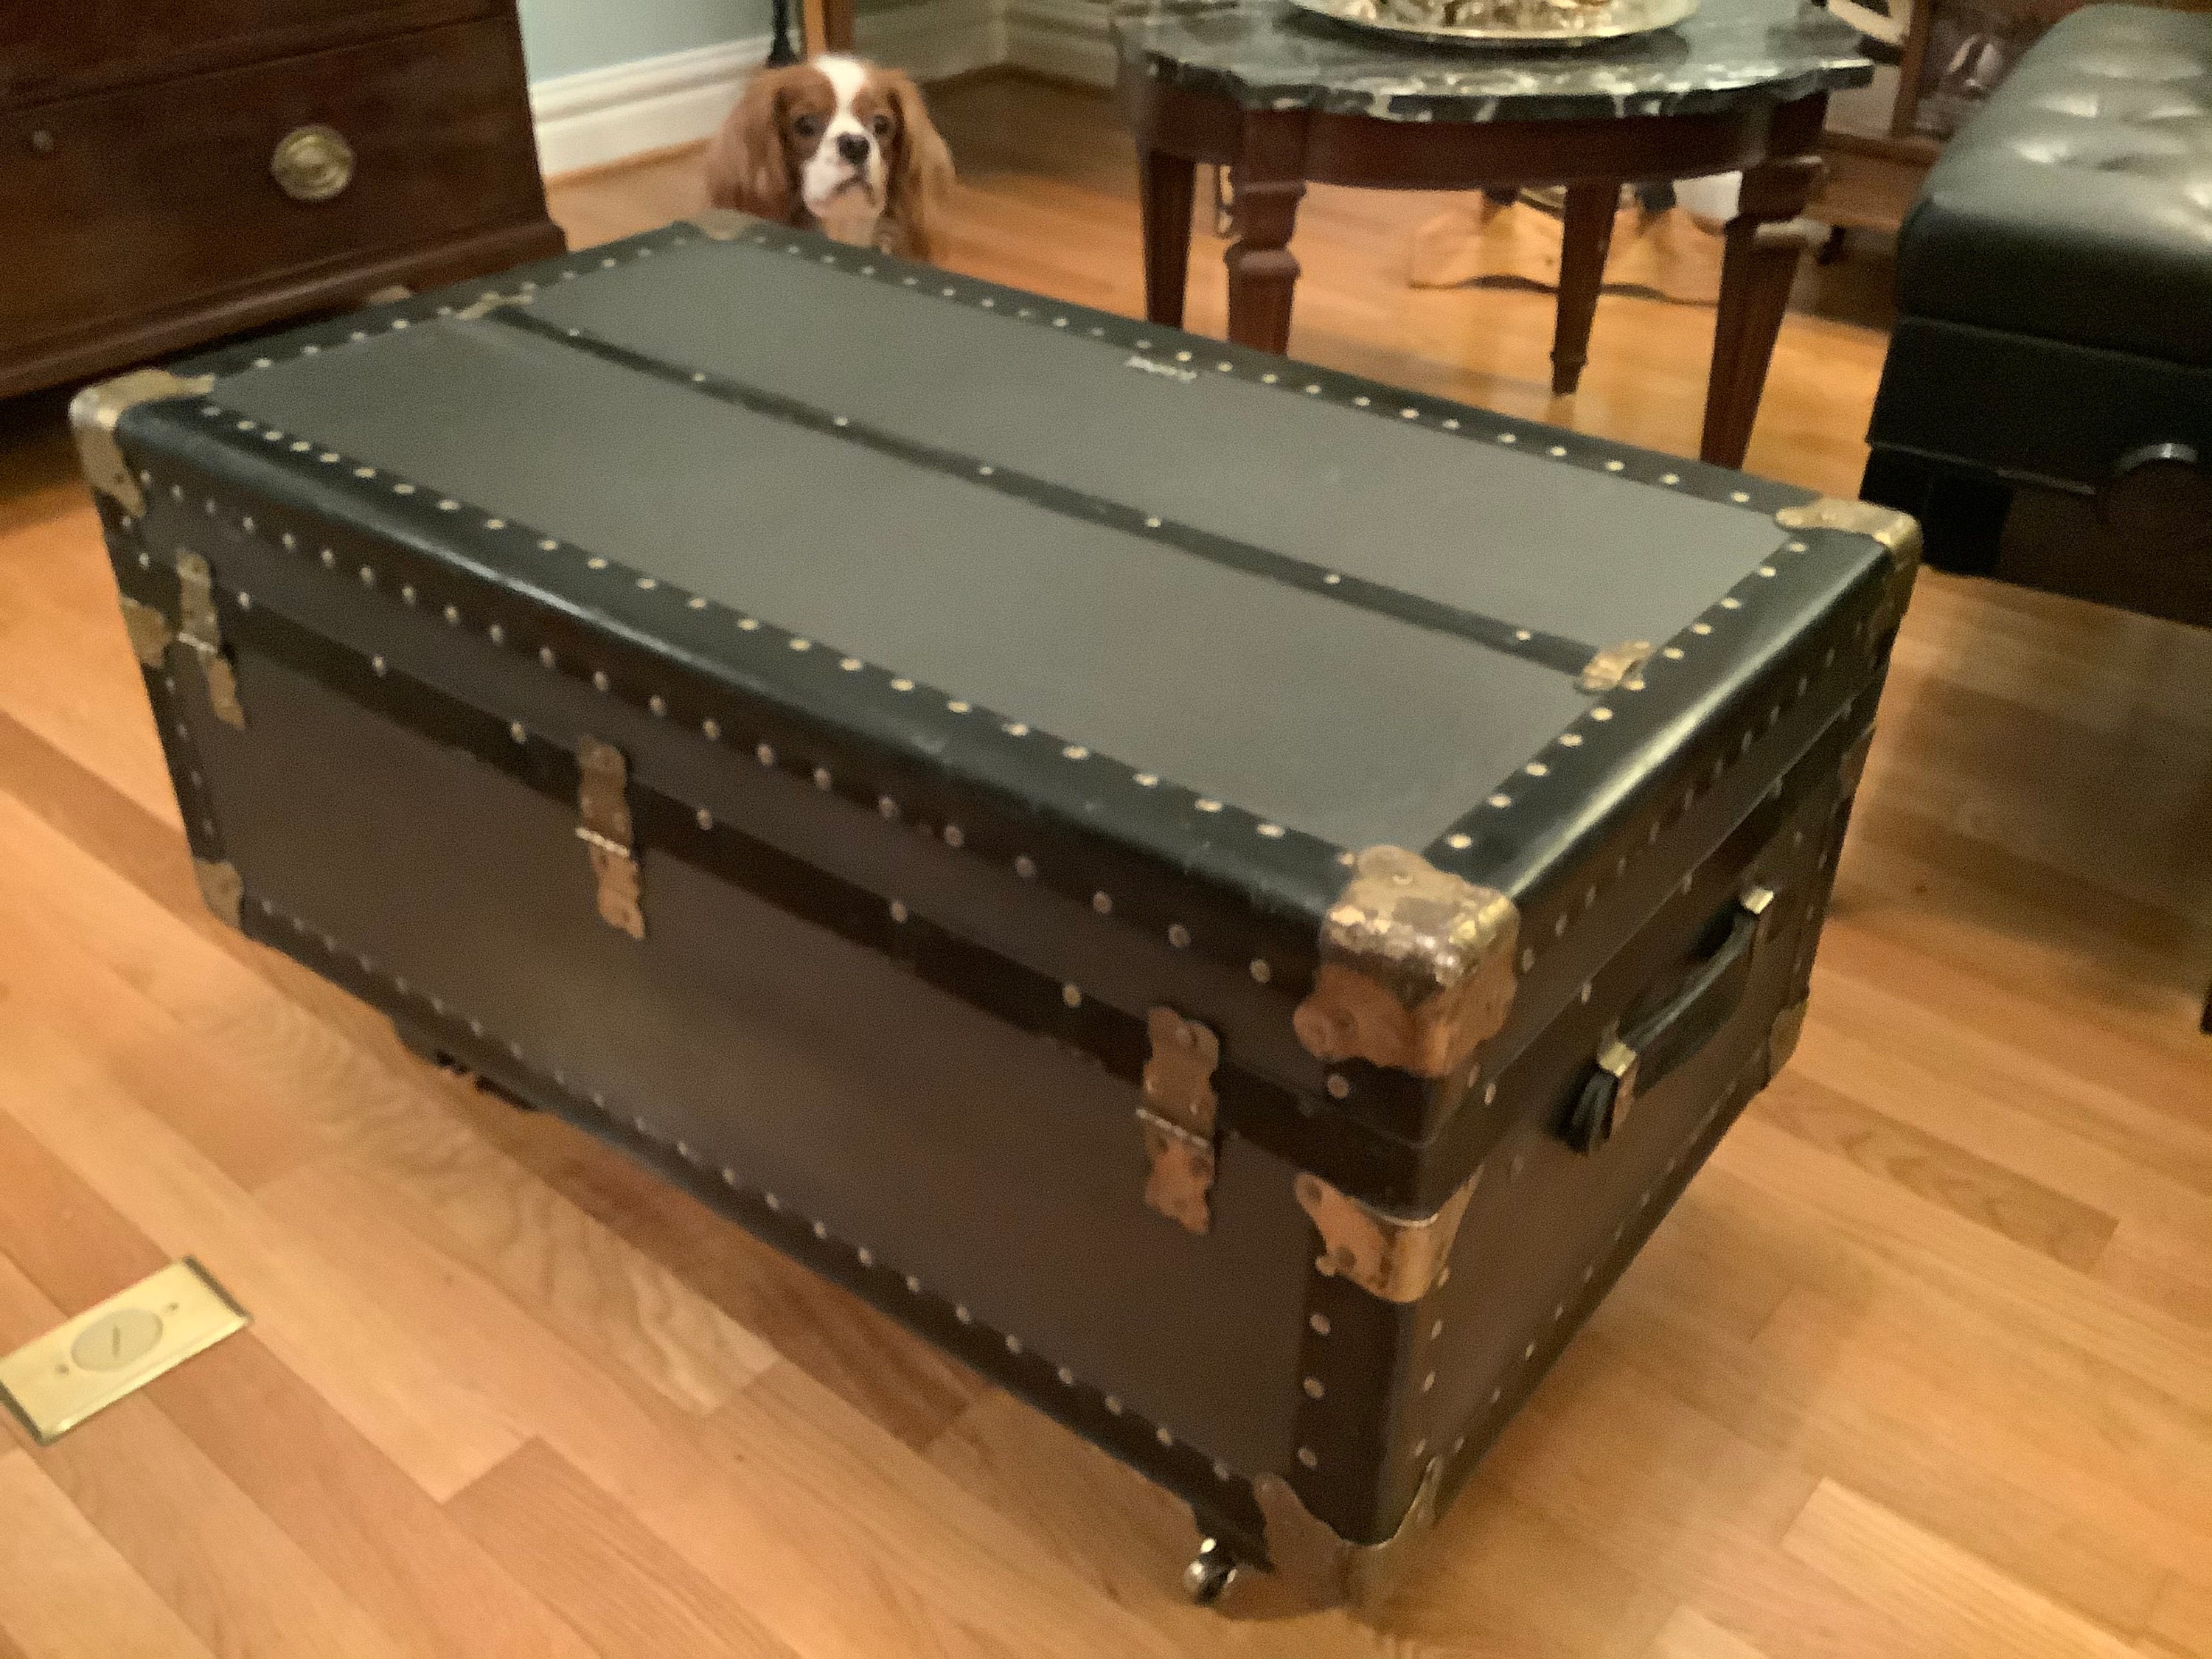 Immaculate Antique Aux Etats Unis Travel Trunk Coffee Table -  Hong Kong